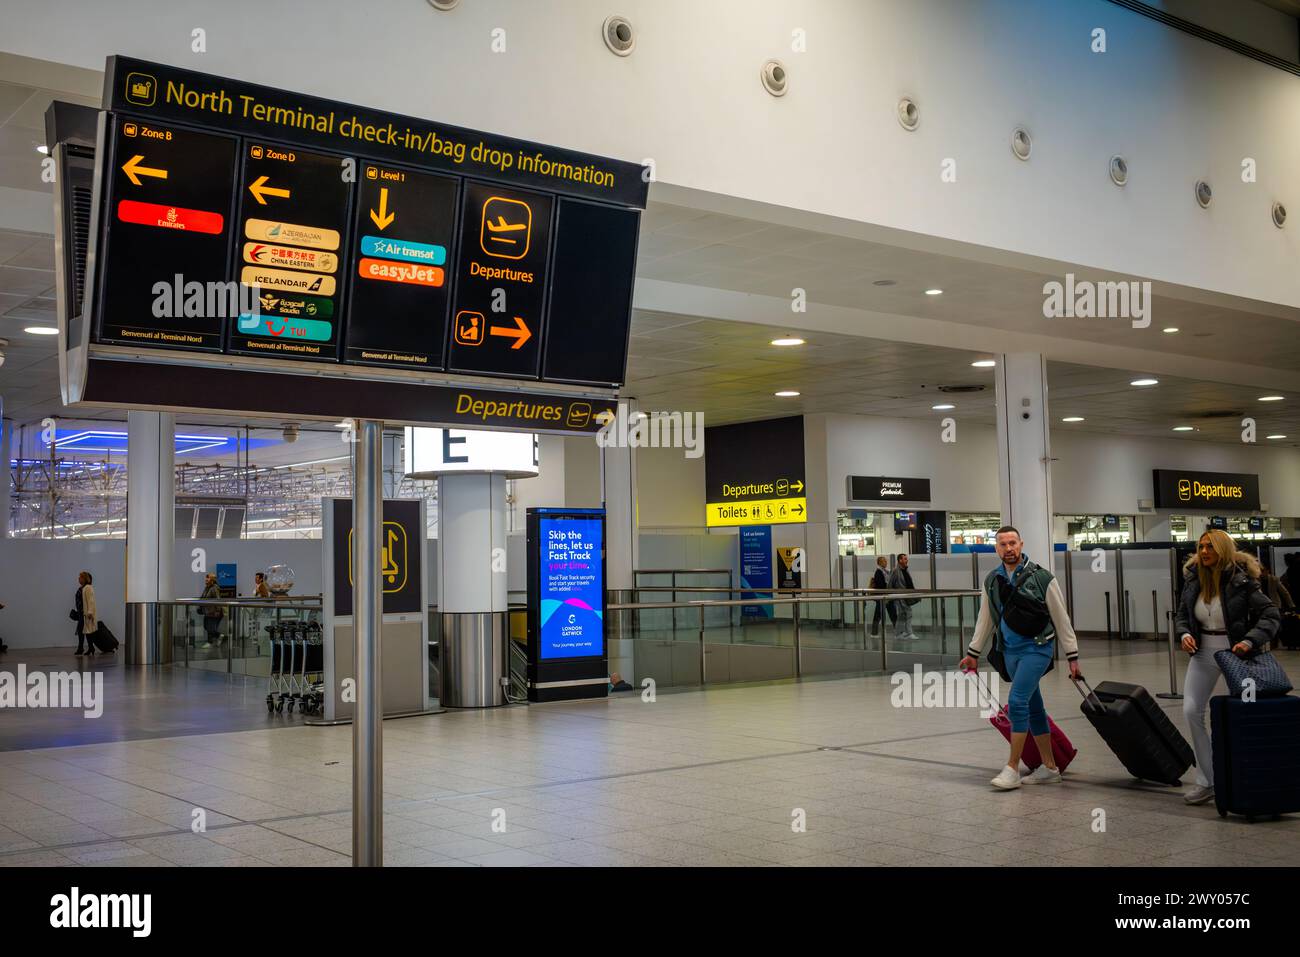 Check in information sign at departures in North Terminal, Gatwick Airport, London, UK. Stock Photo